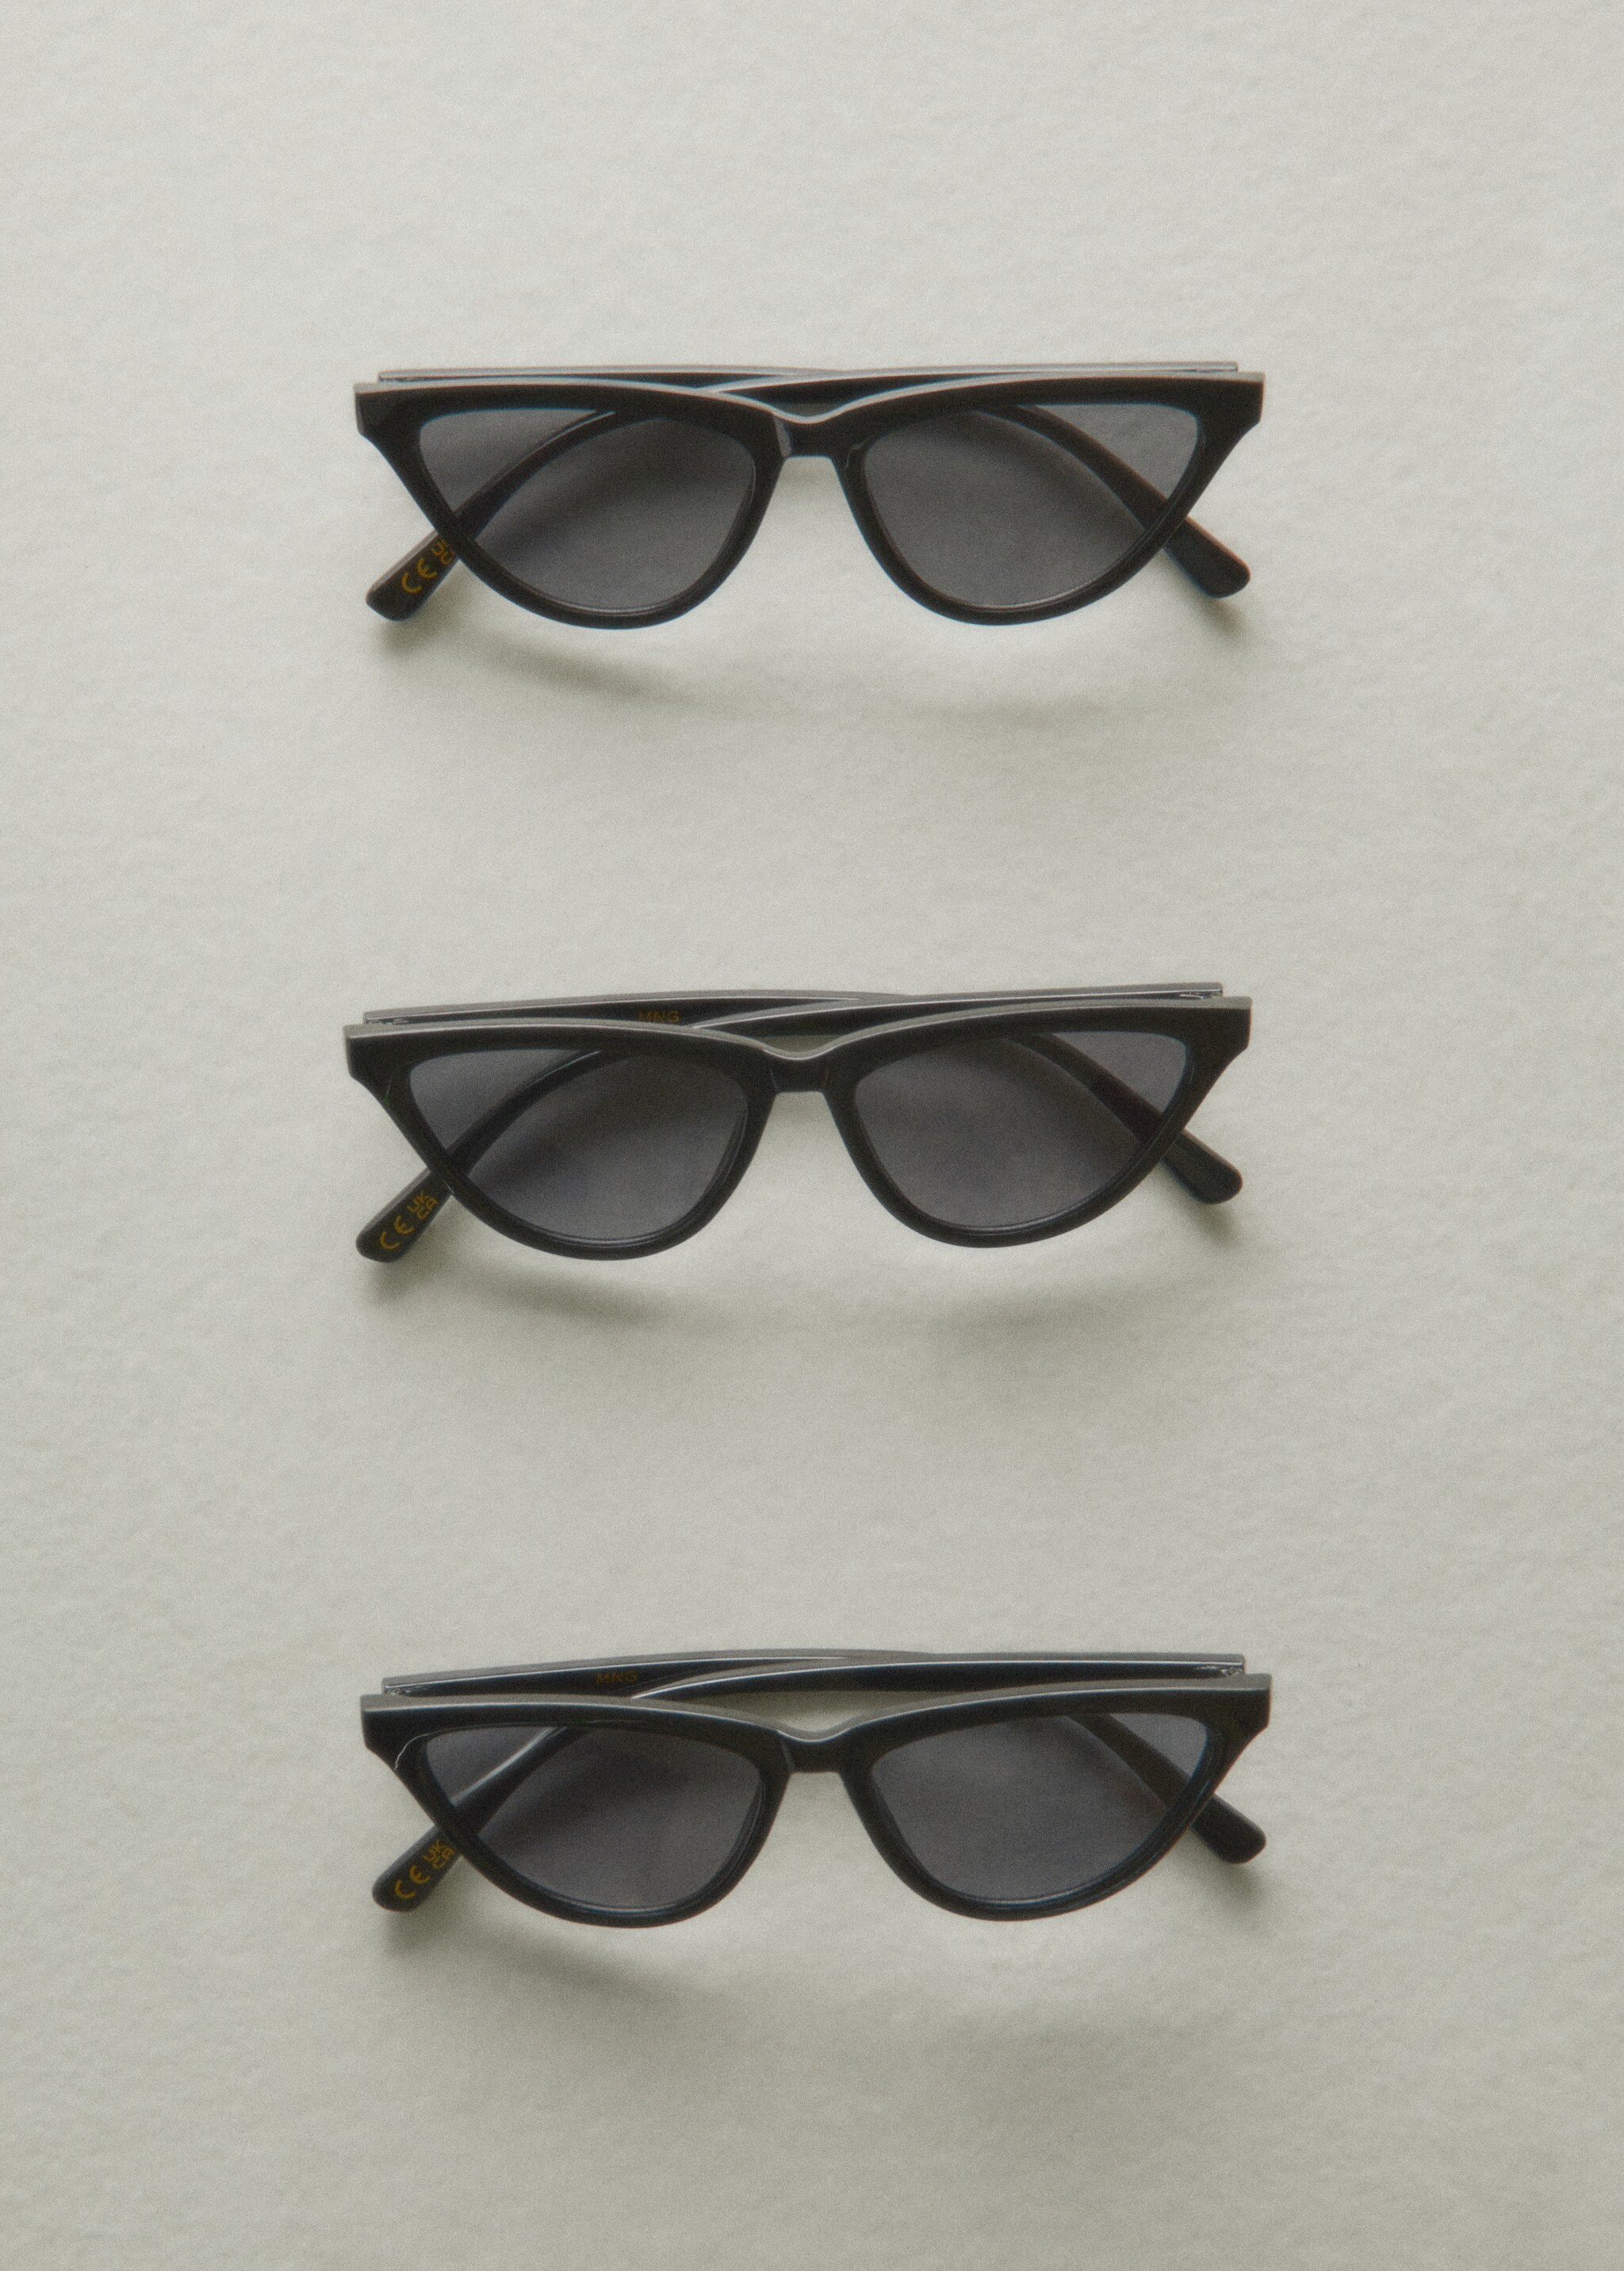 Retro style sunglasses - Details of the article 8